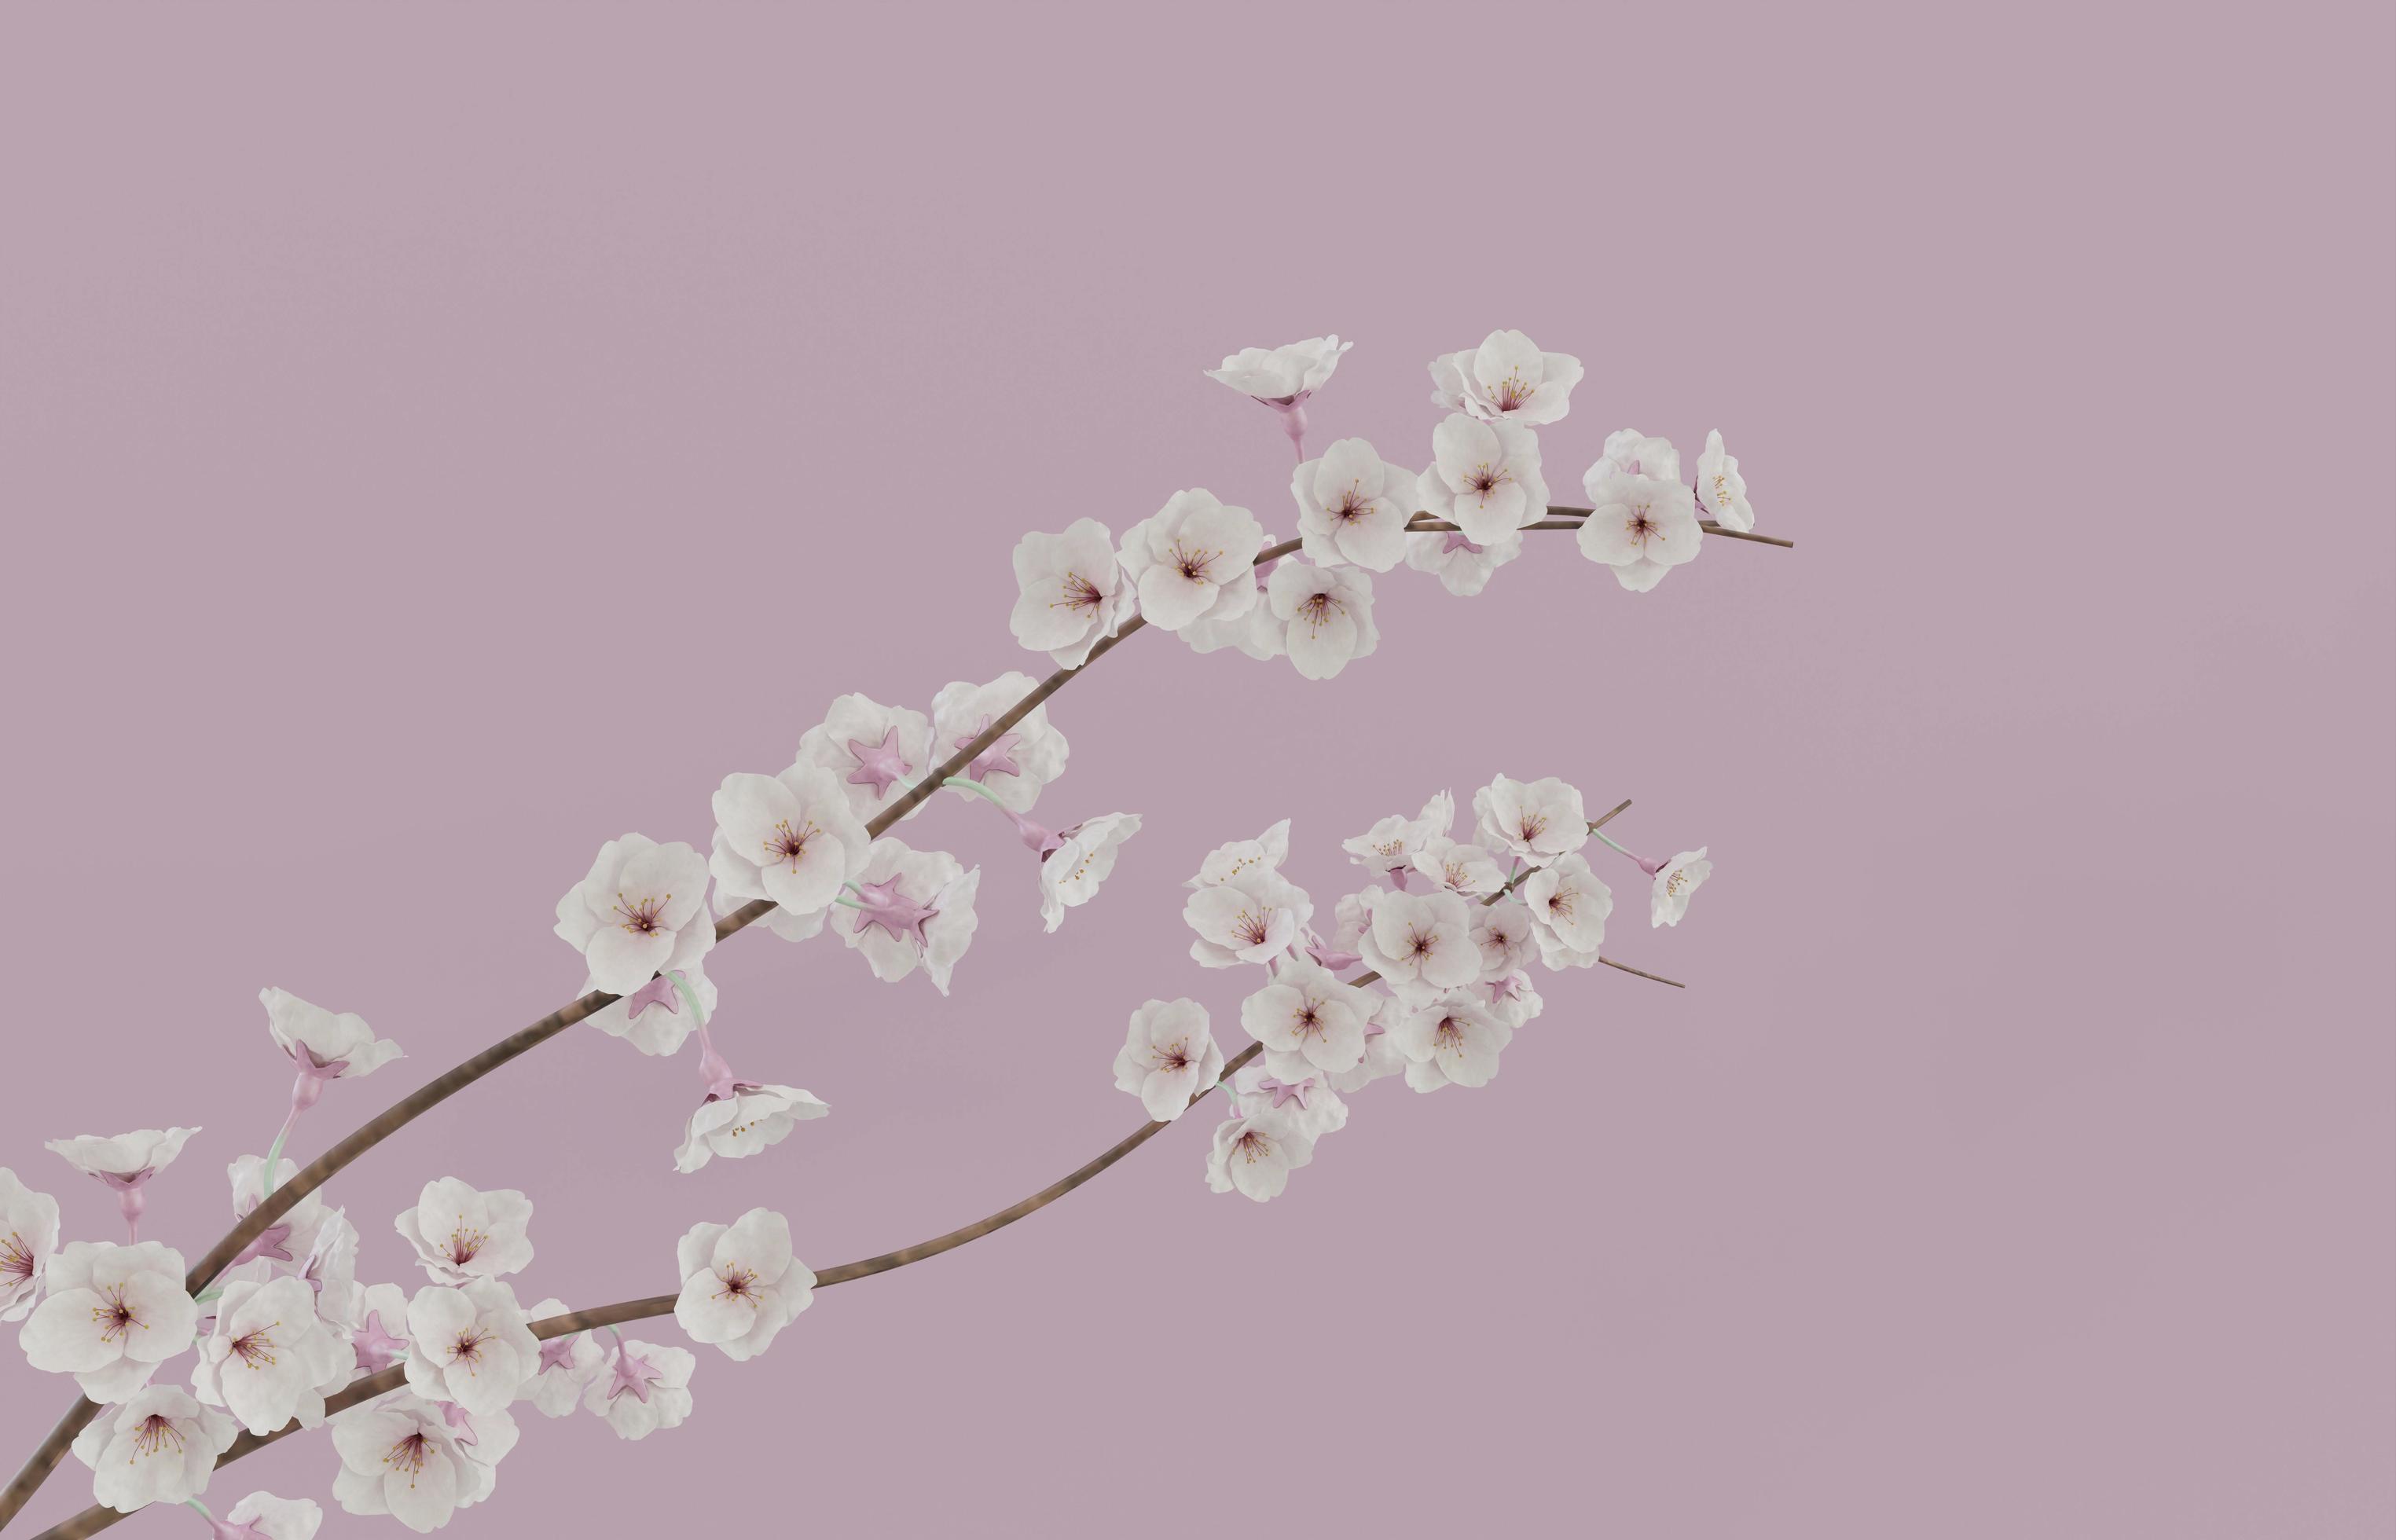 A branch of cherry blossoms against a purple background - Cherry blossom